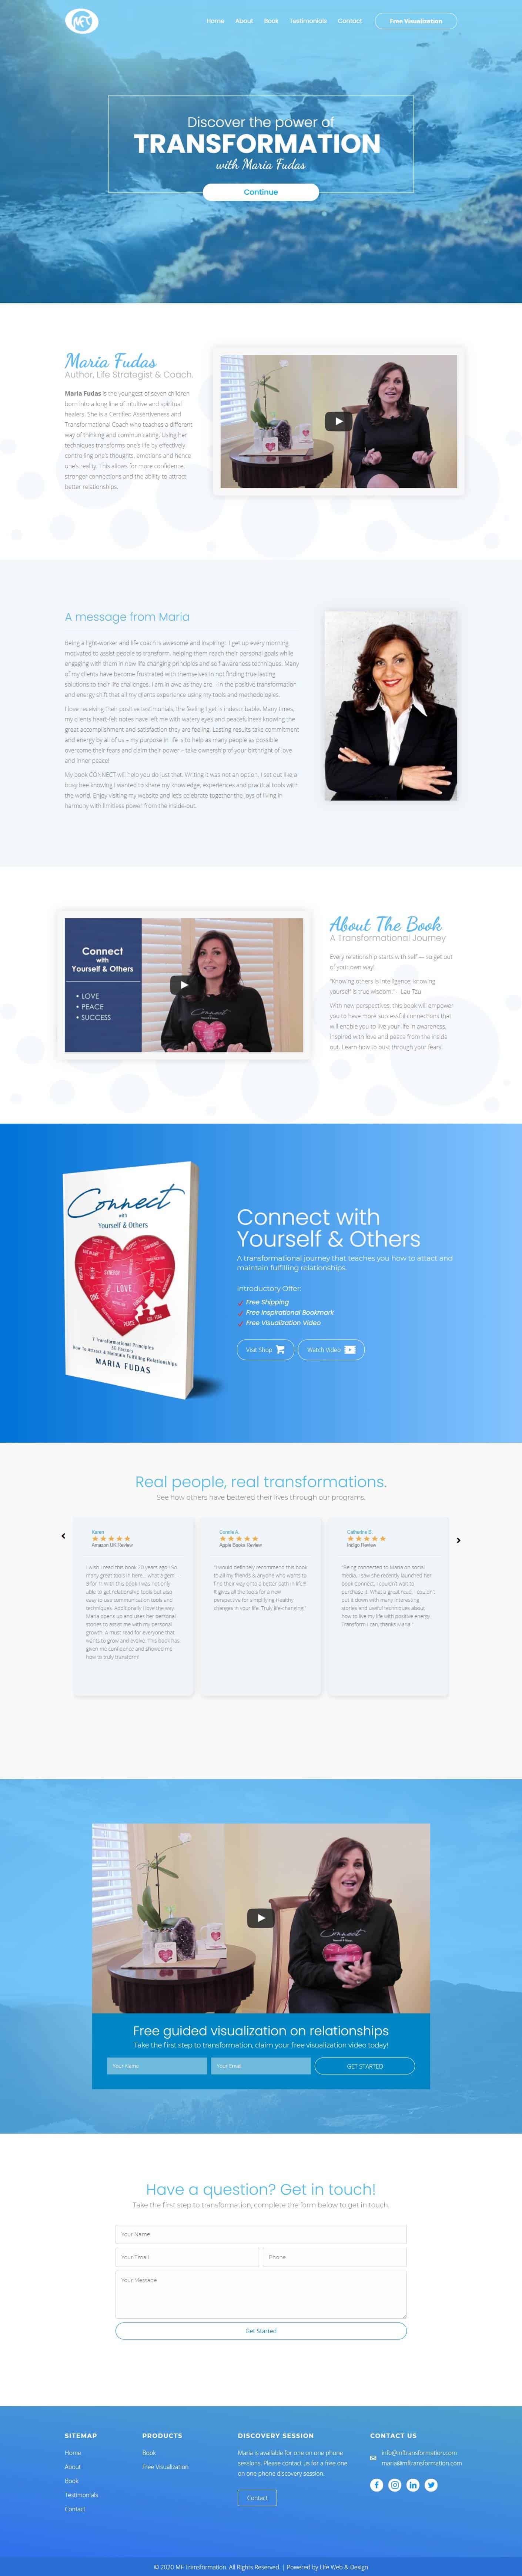 web design project for book release in Toronto On